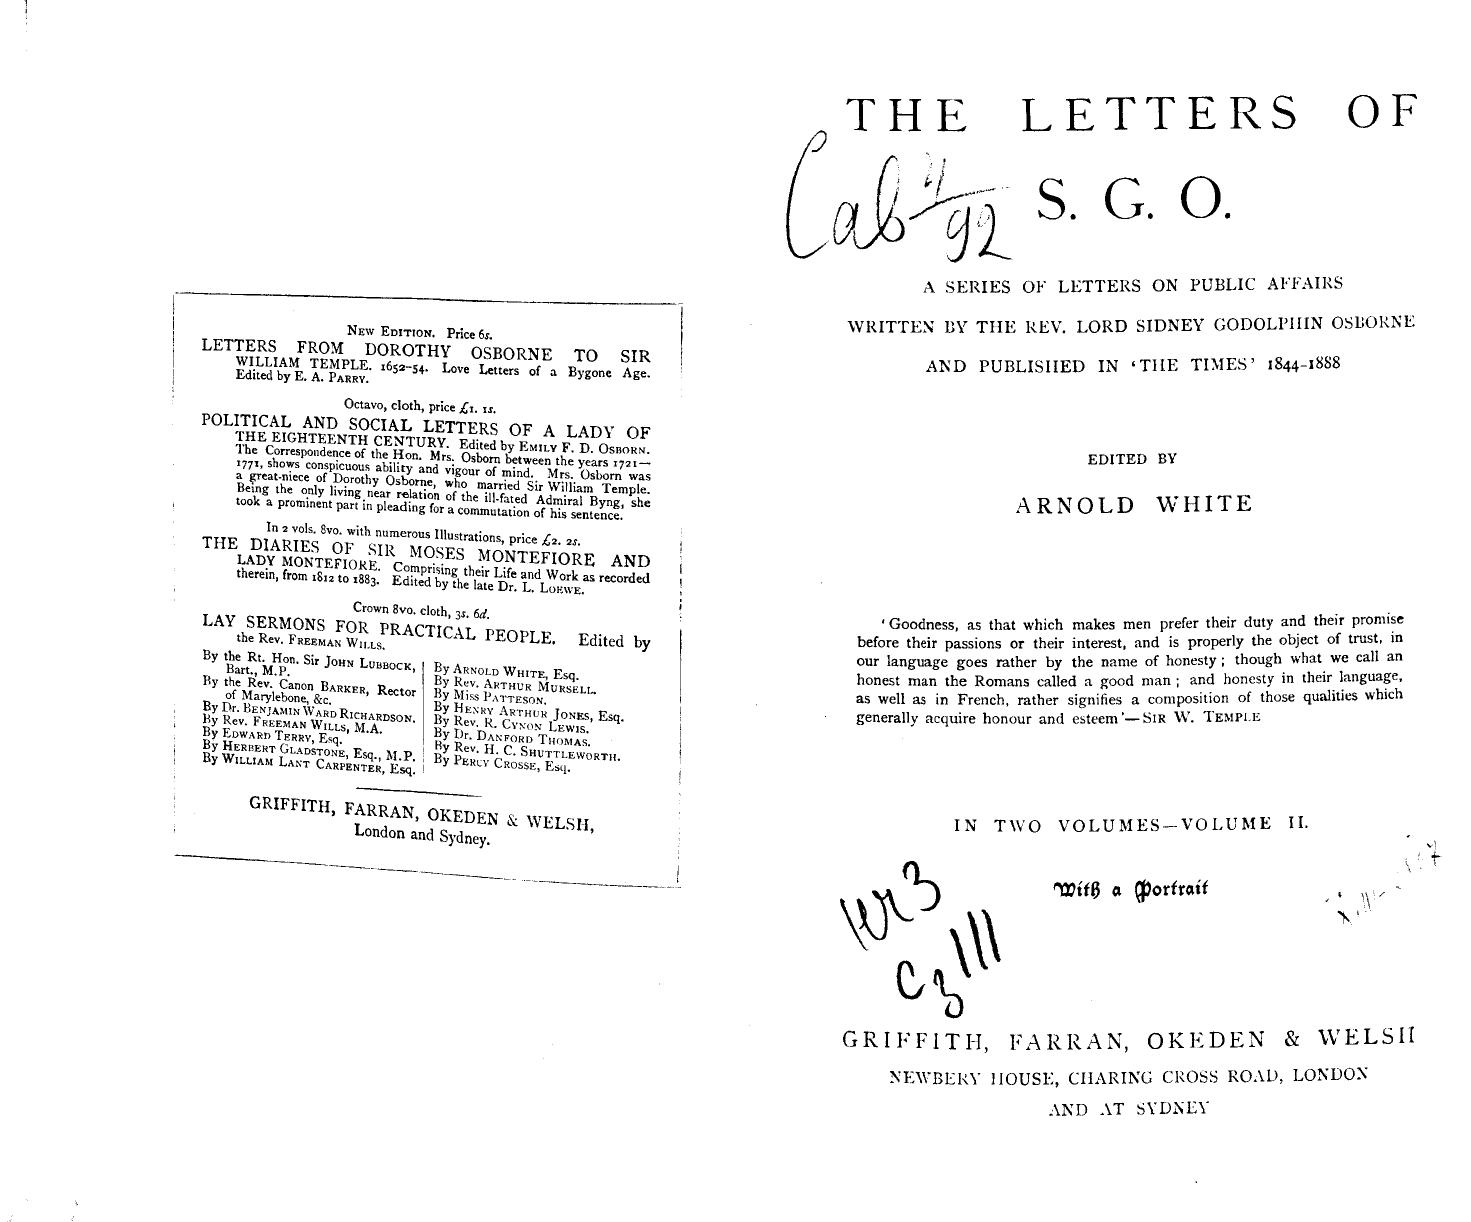 Edited BY Arnold White by The letters of s.g.o. . vol. 2